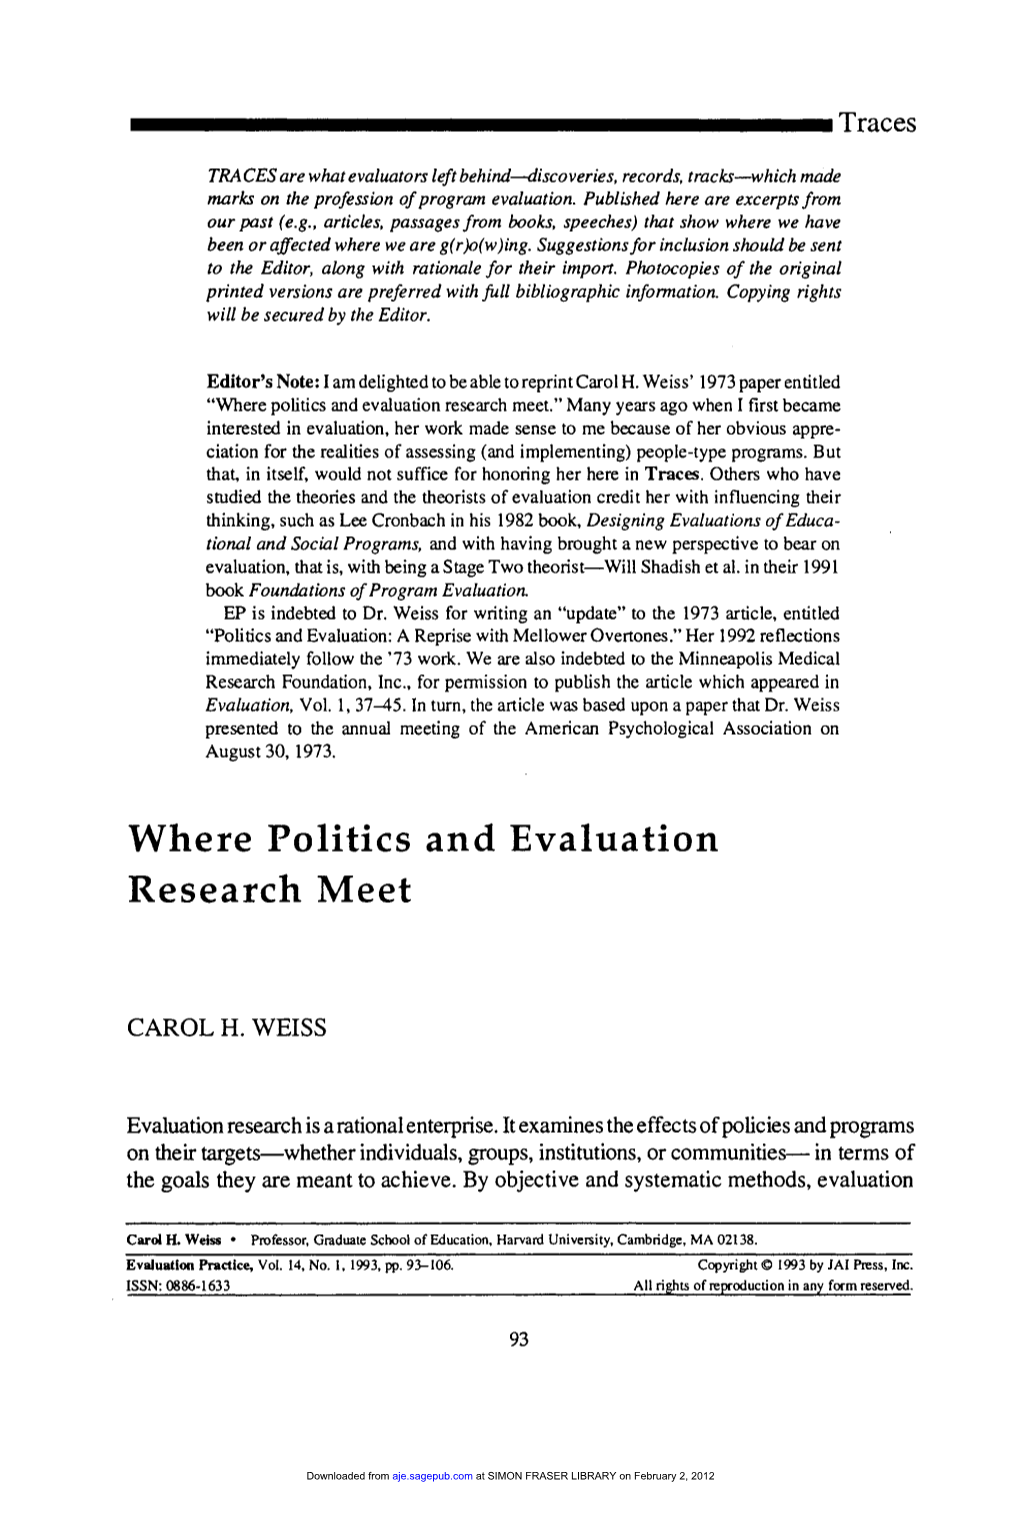 Where Politics and Evaluation Research Meet